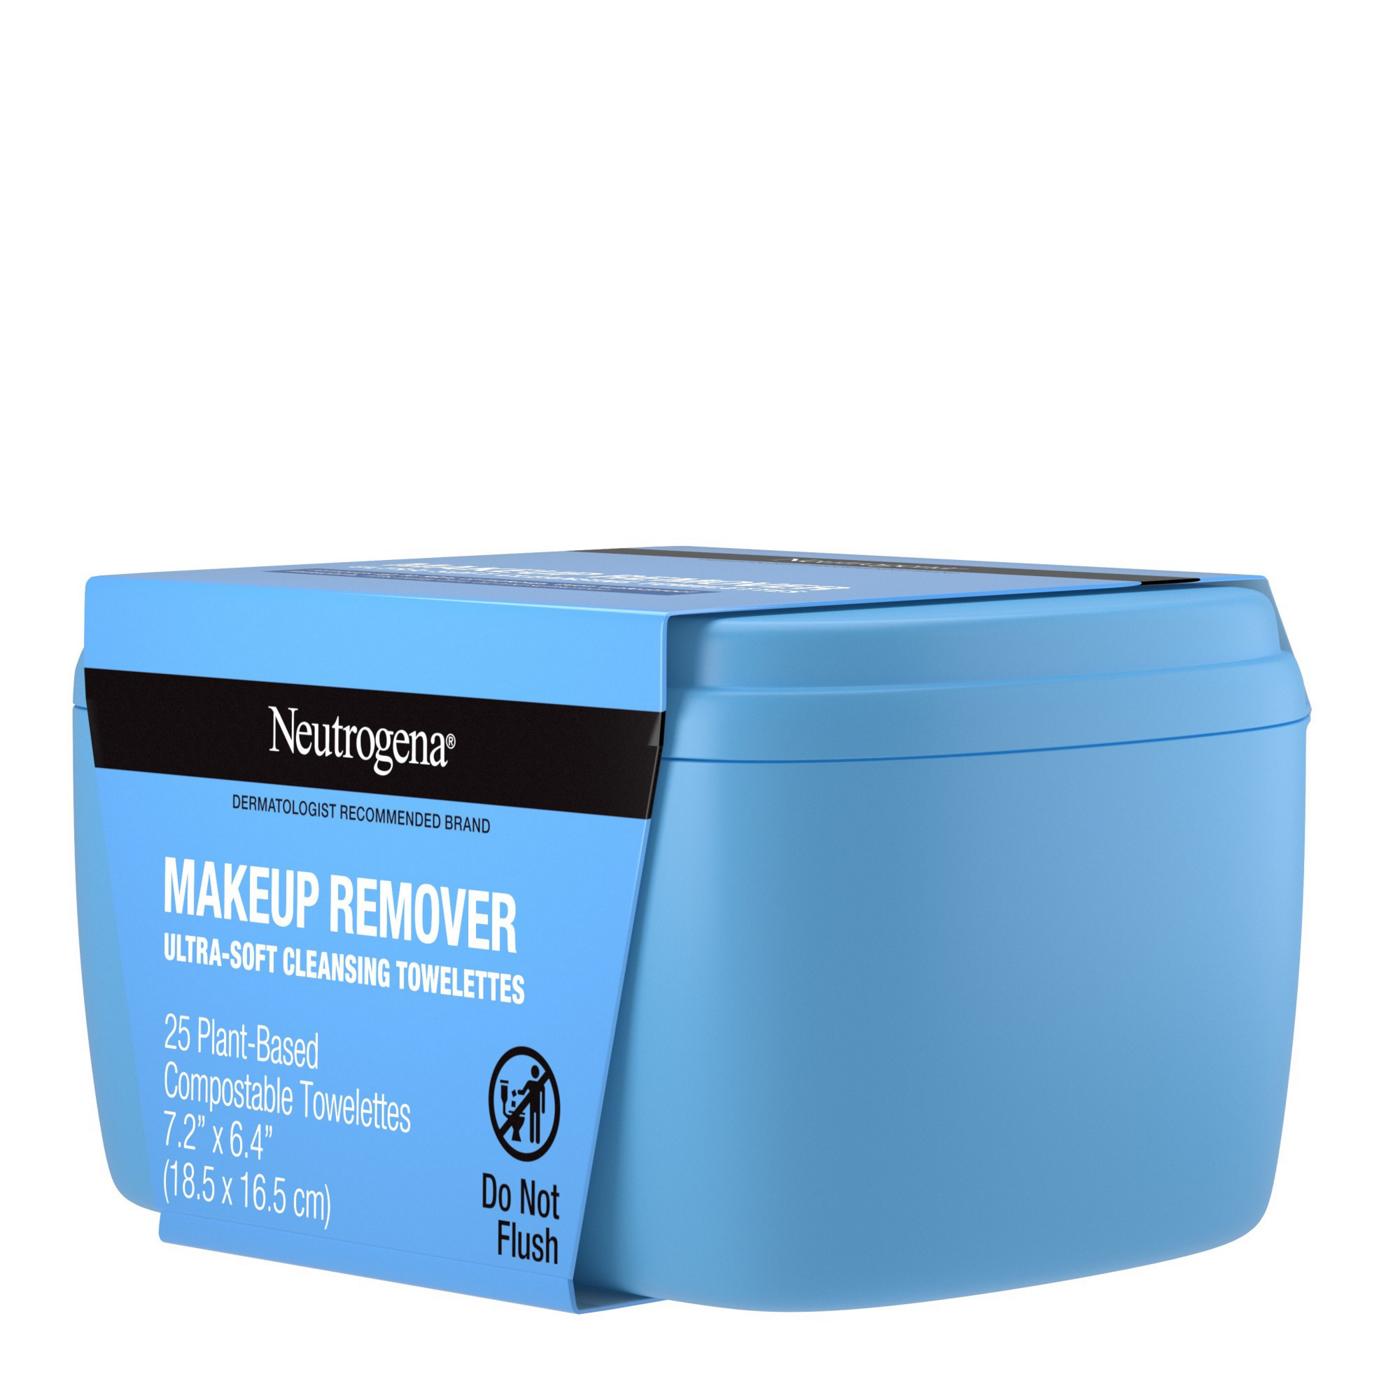 Neutrogena Makeup Remover Cleansing Towelettes; image 3 of 3